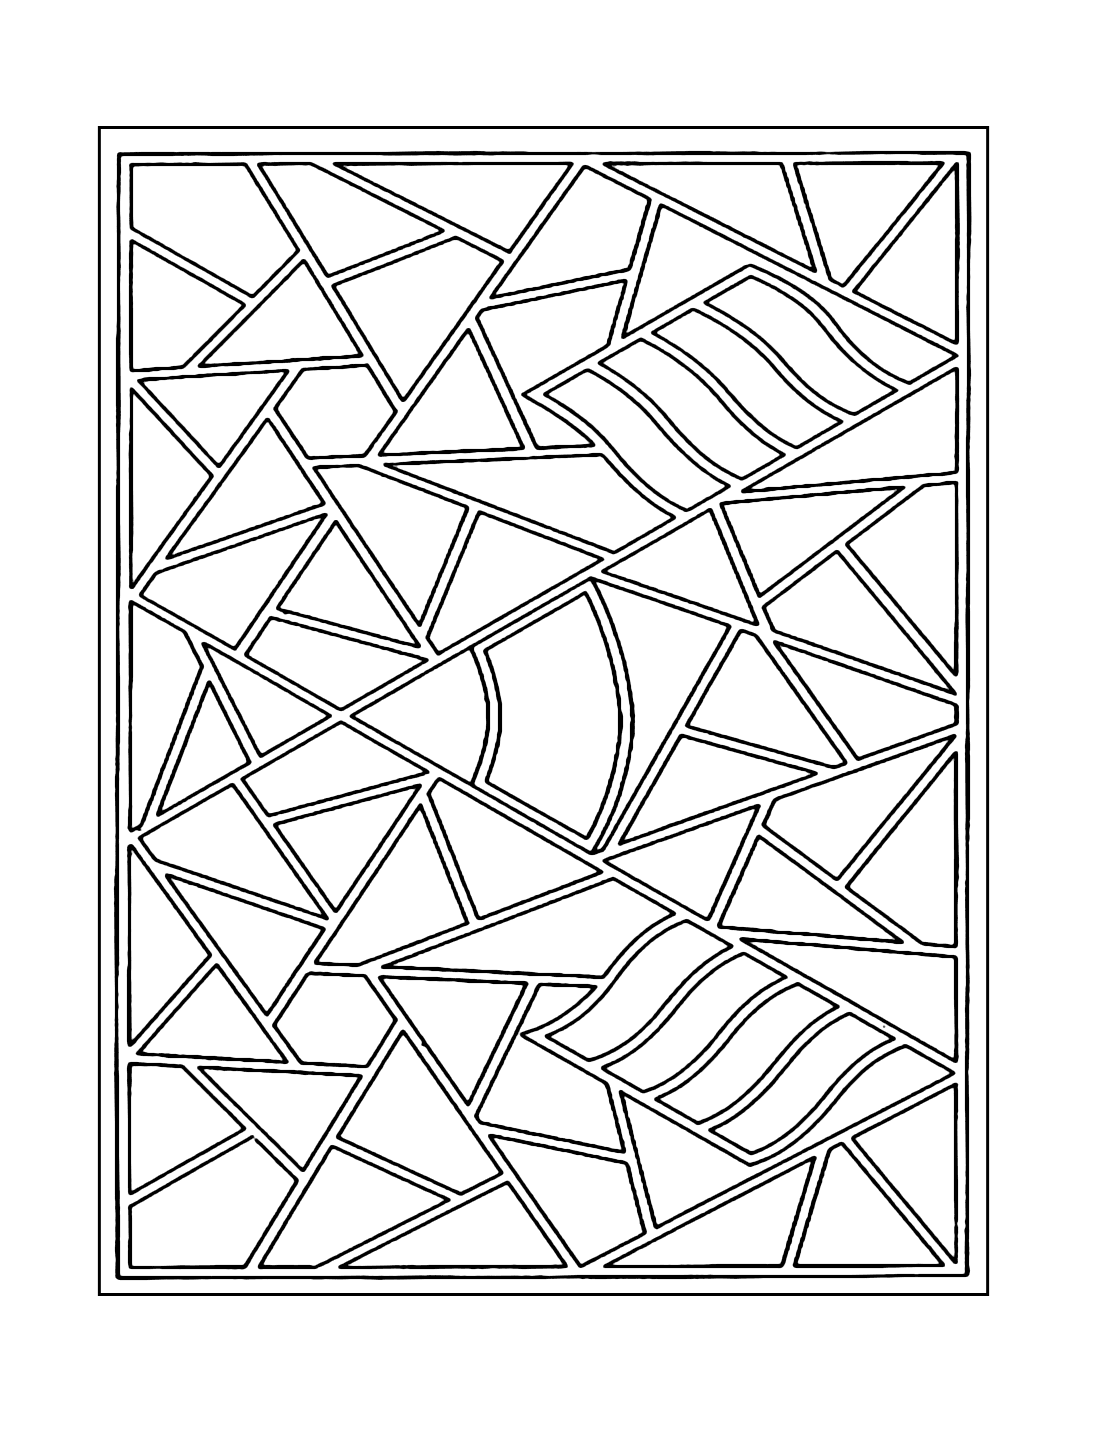 Easy Mosaic Coloring Page